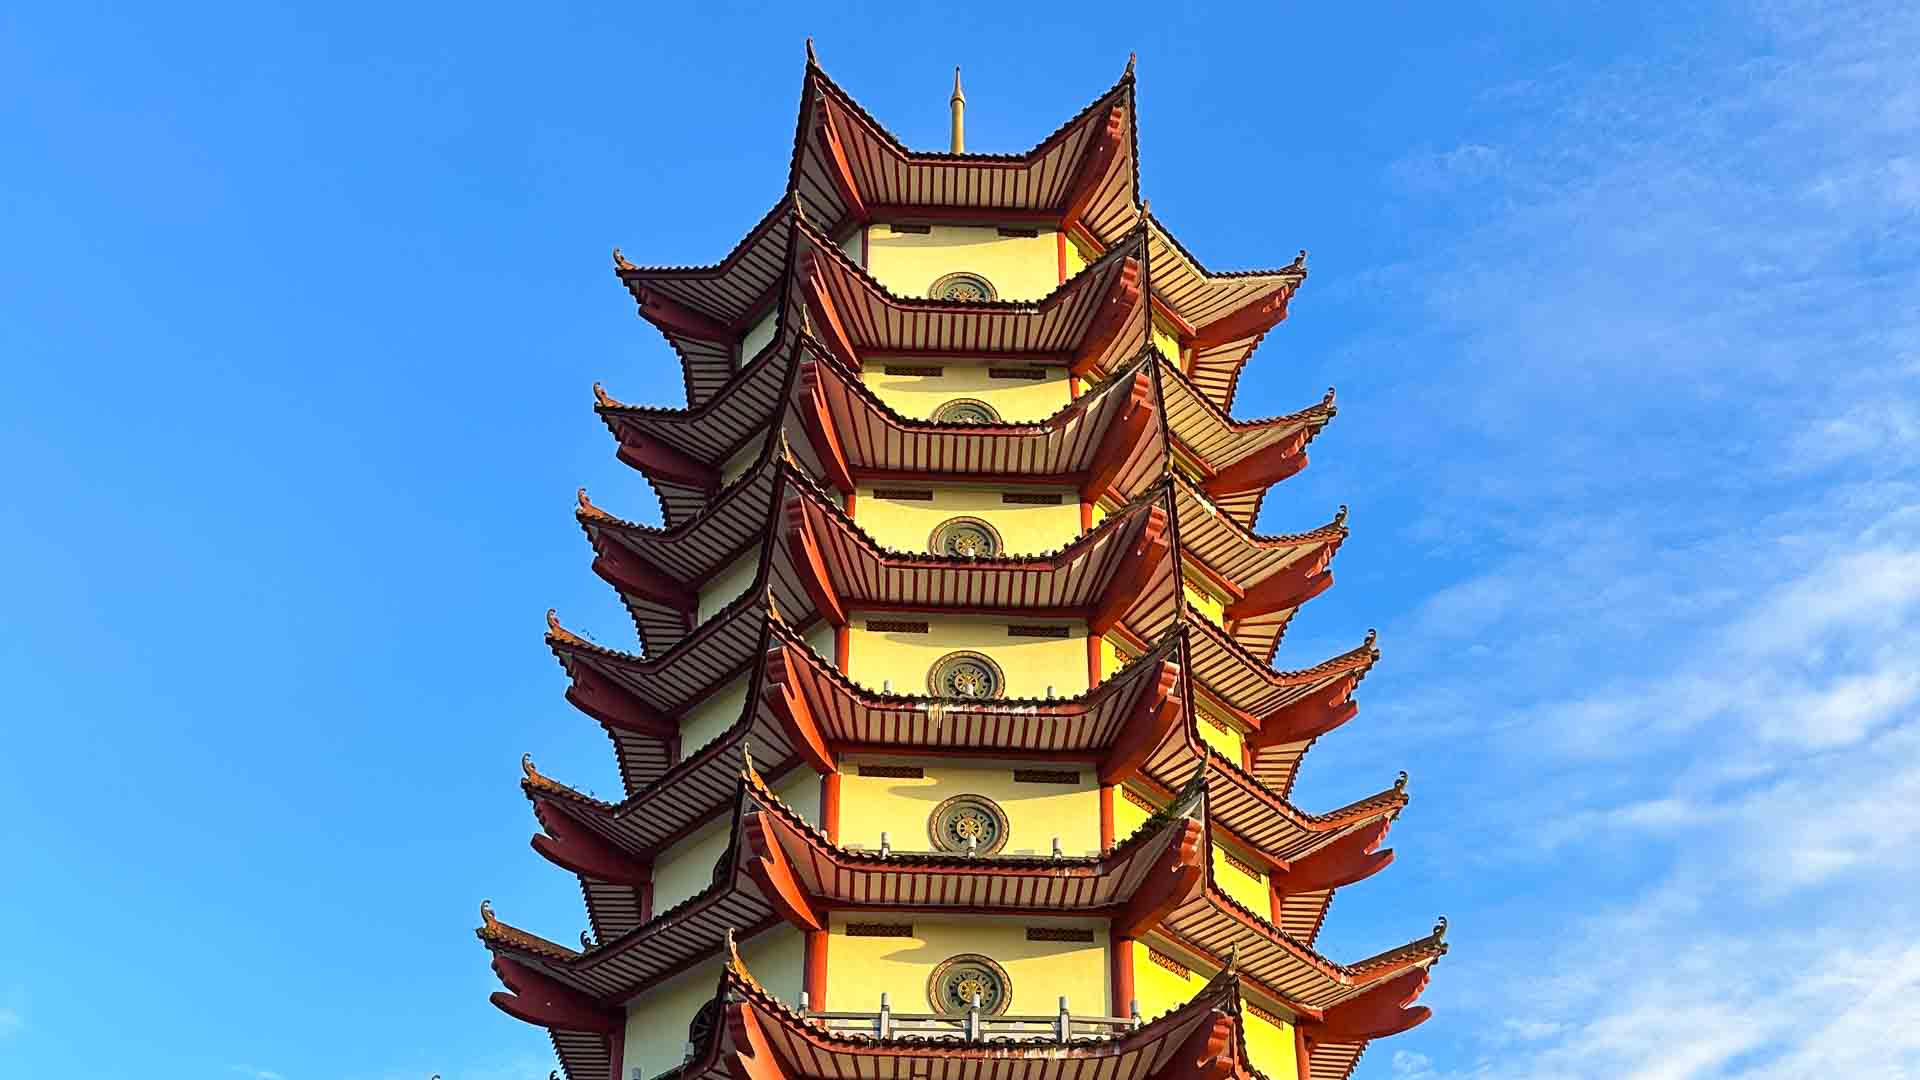 Yellow and red temple against a blue sky